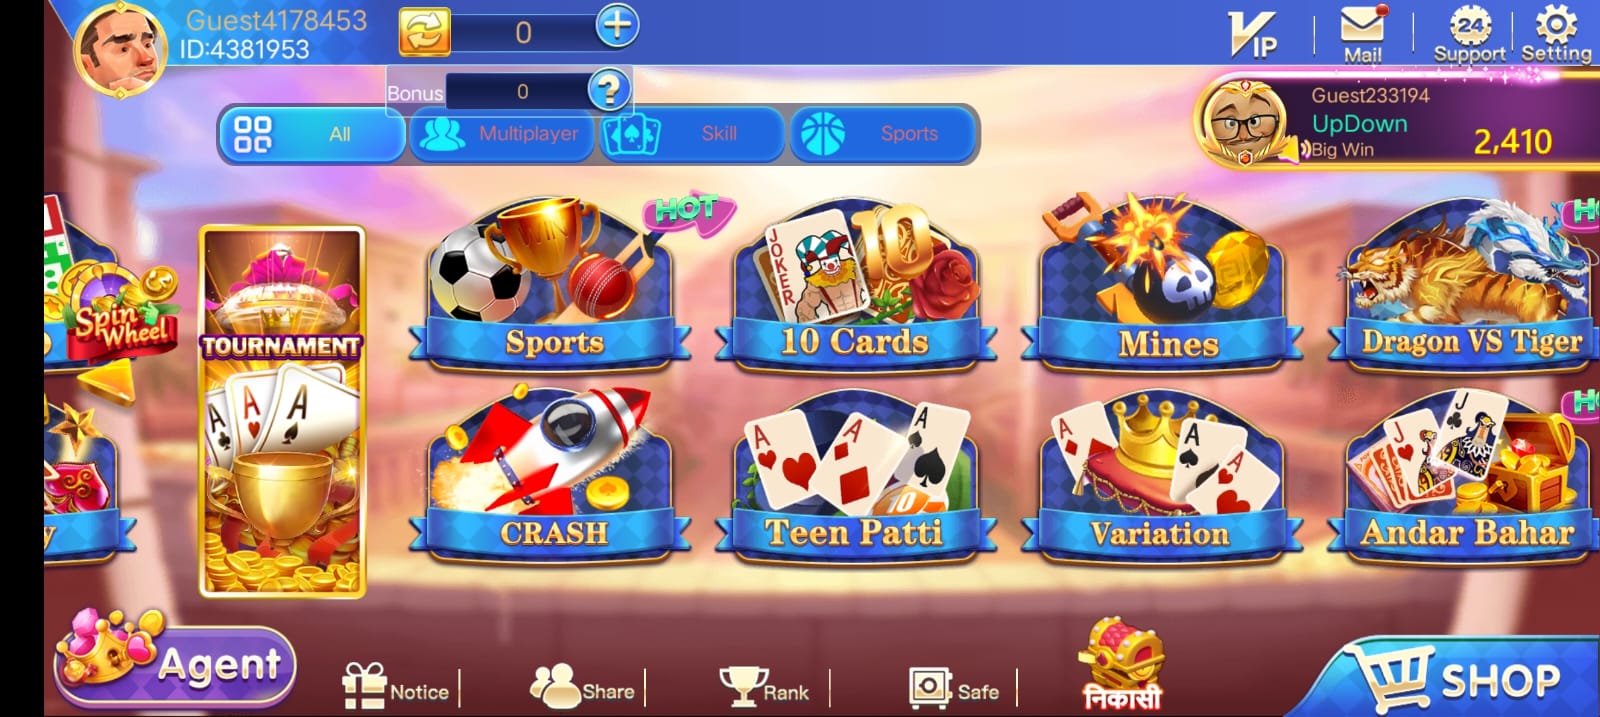 Available Games On Teen Patti Party App